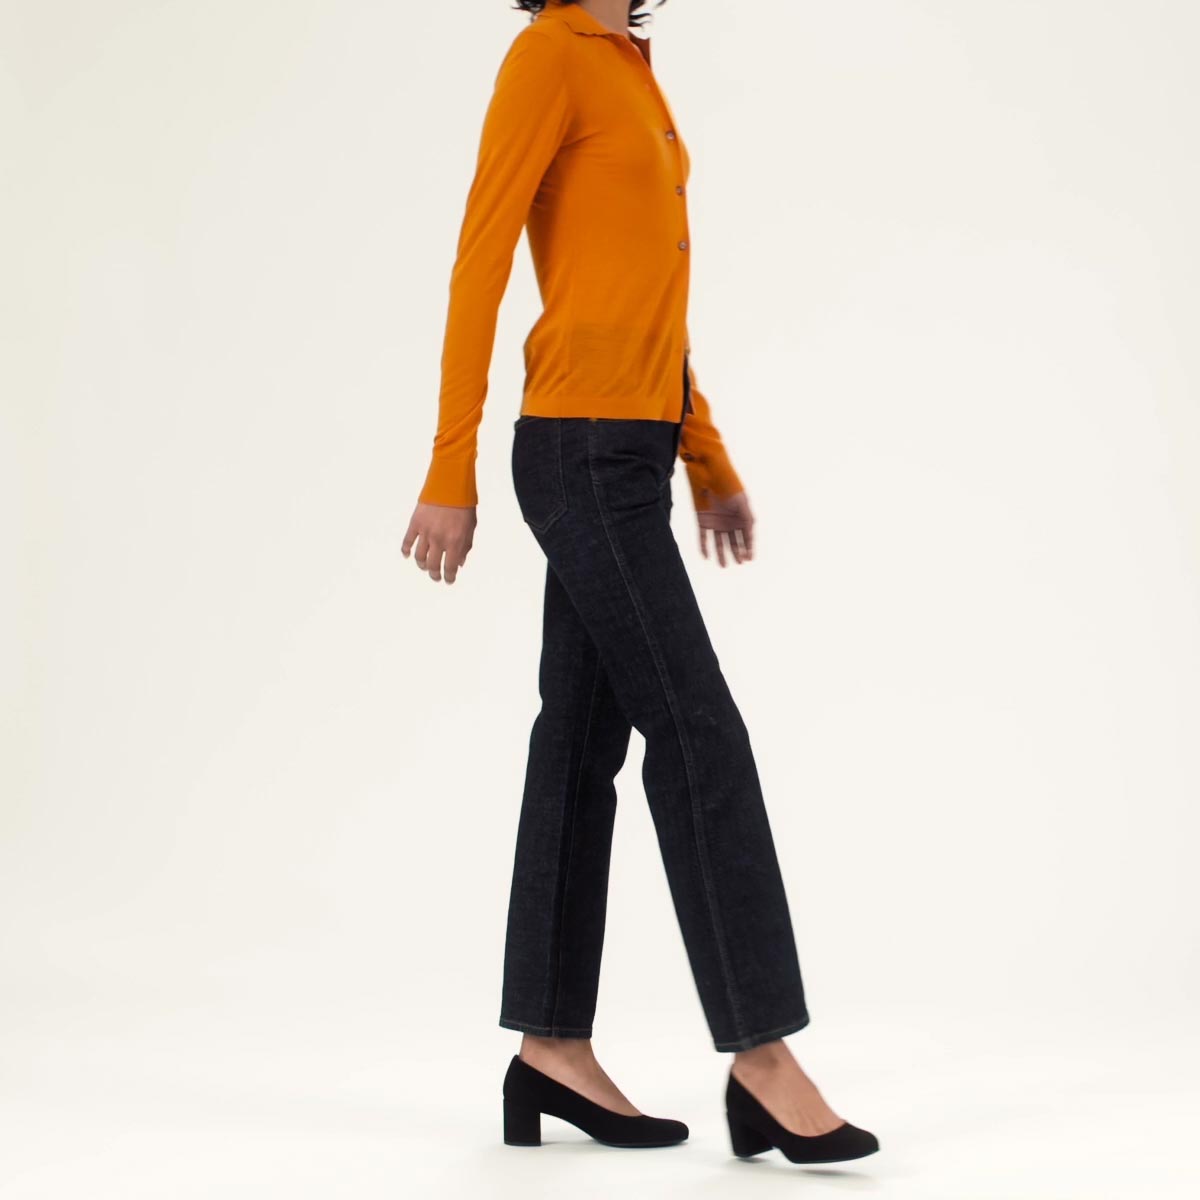 The Heel in Black shown with black straight leg jeans and an orange cardigan.